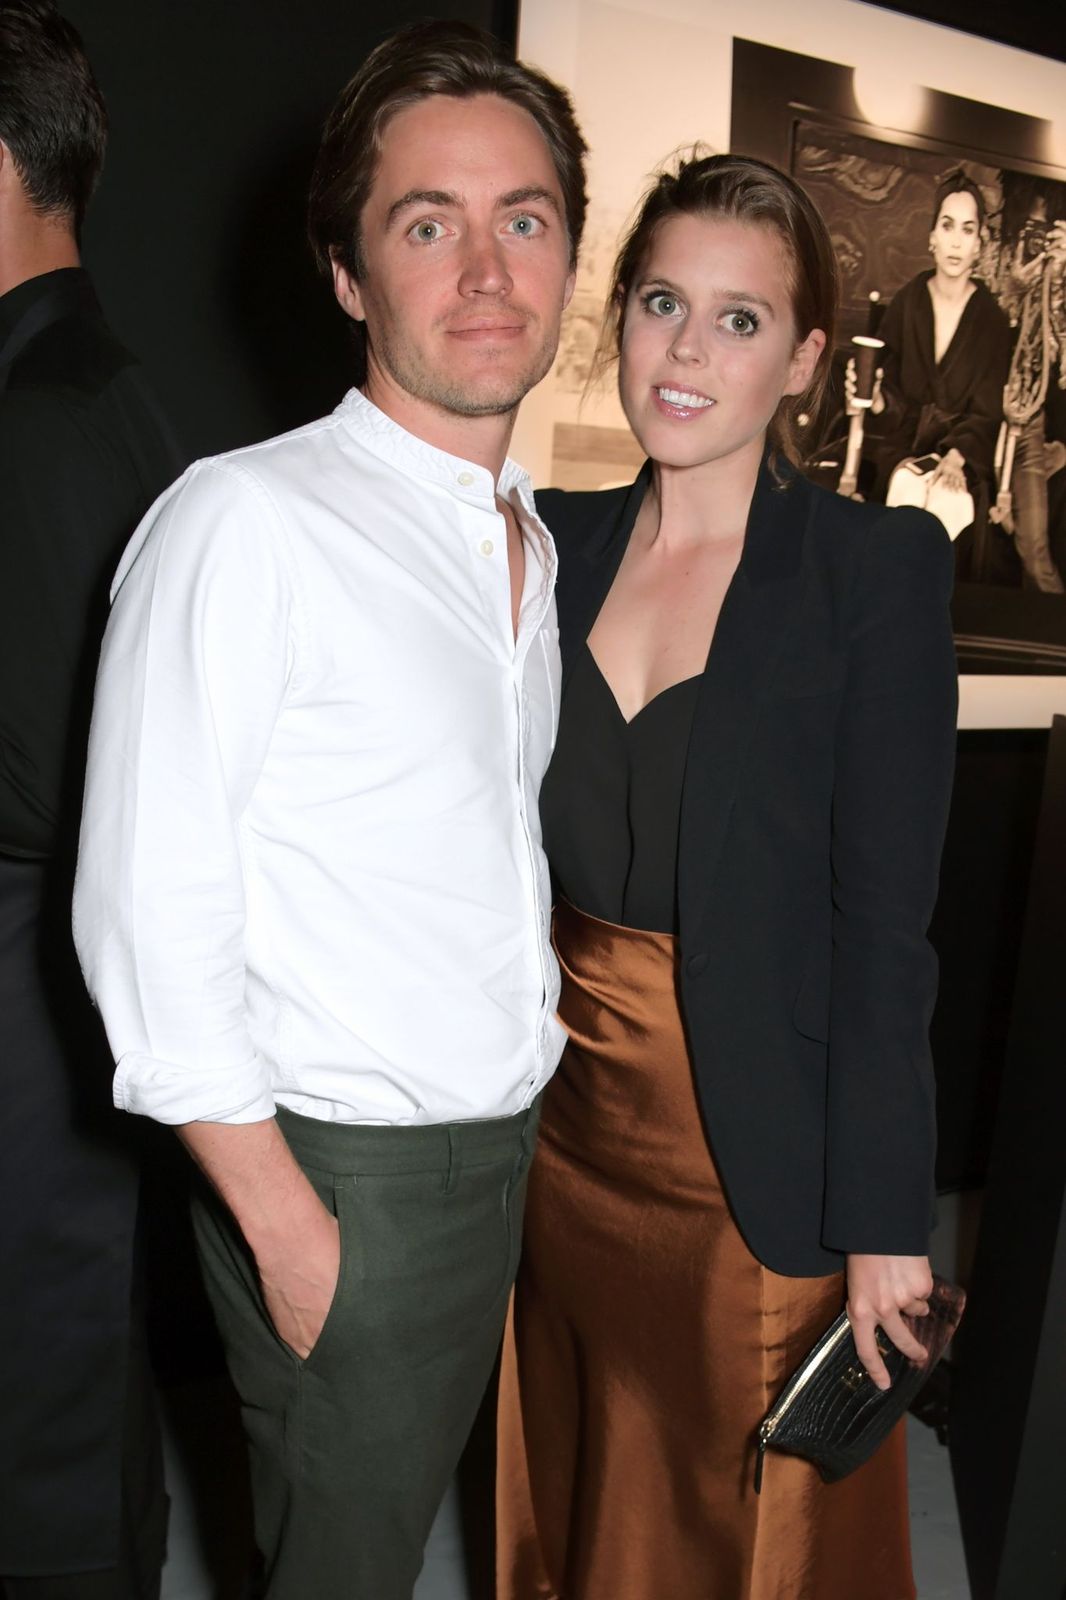 Edoardo Mapelli Mozzi and Princess Beatrice of York at the Lenny Kravitz & Dom Perignon 'Assemblage' exhibition on July 10, 2019 in London, England | Photo: Getty Images 